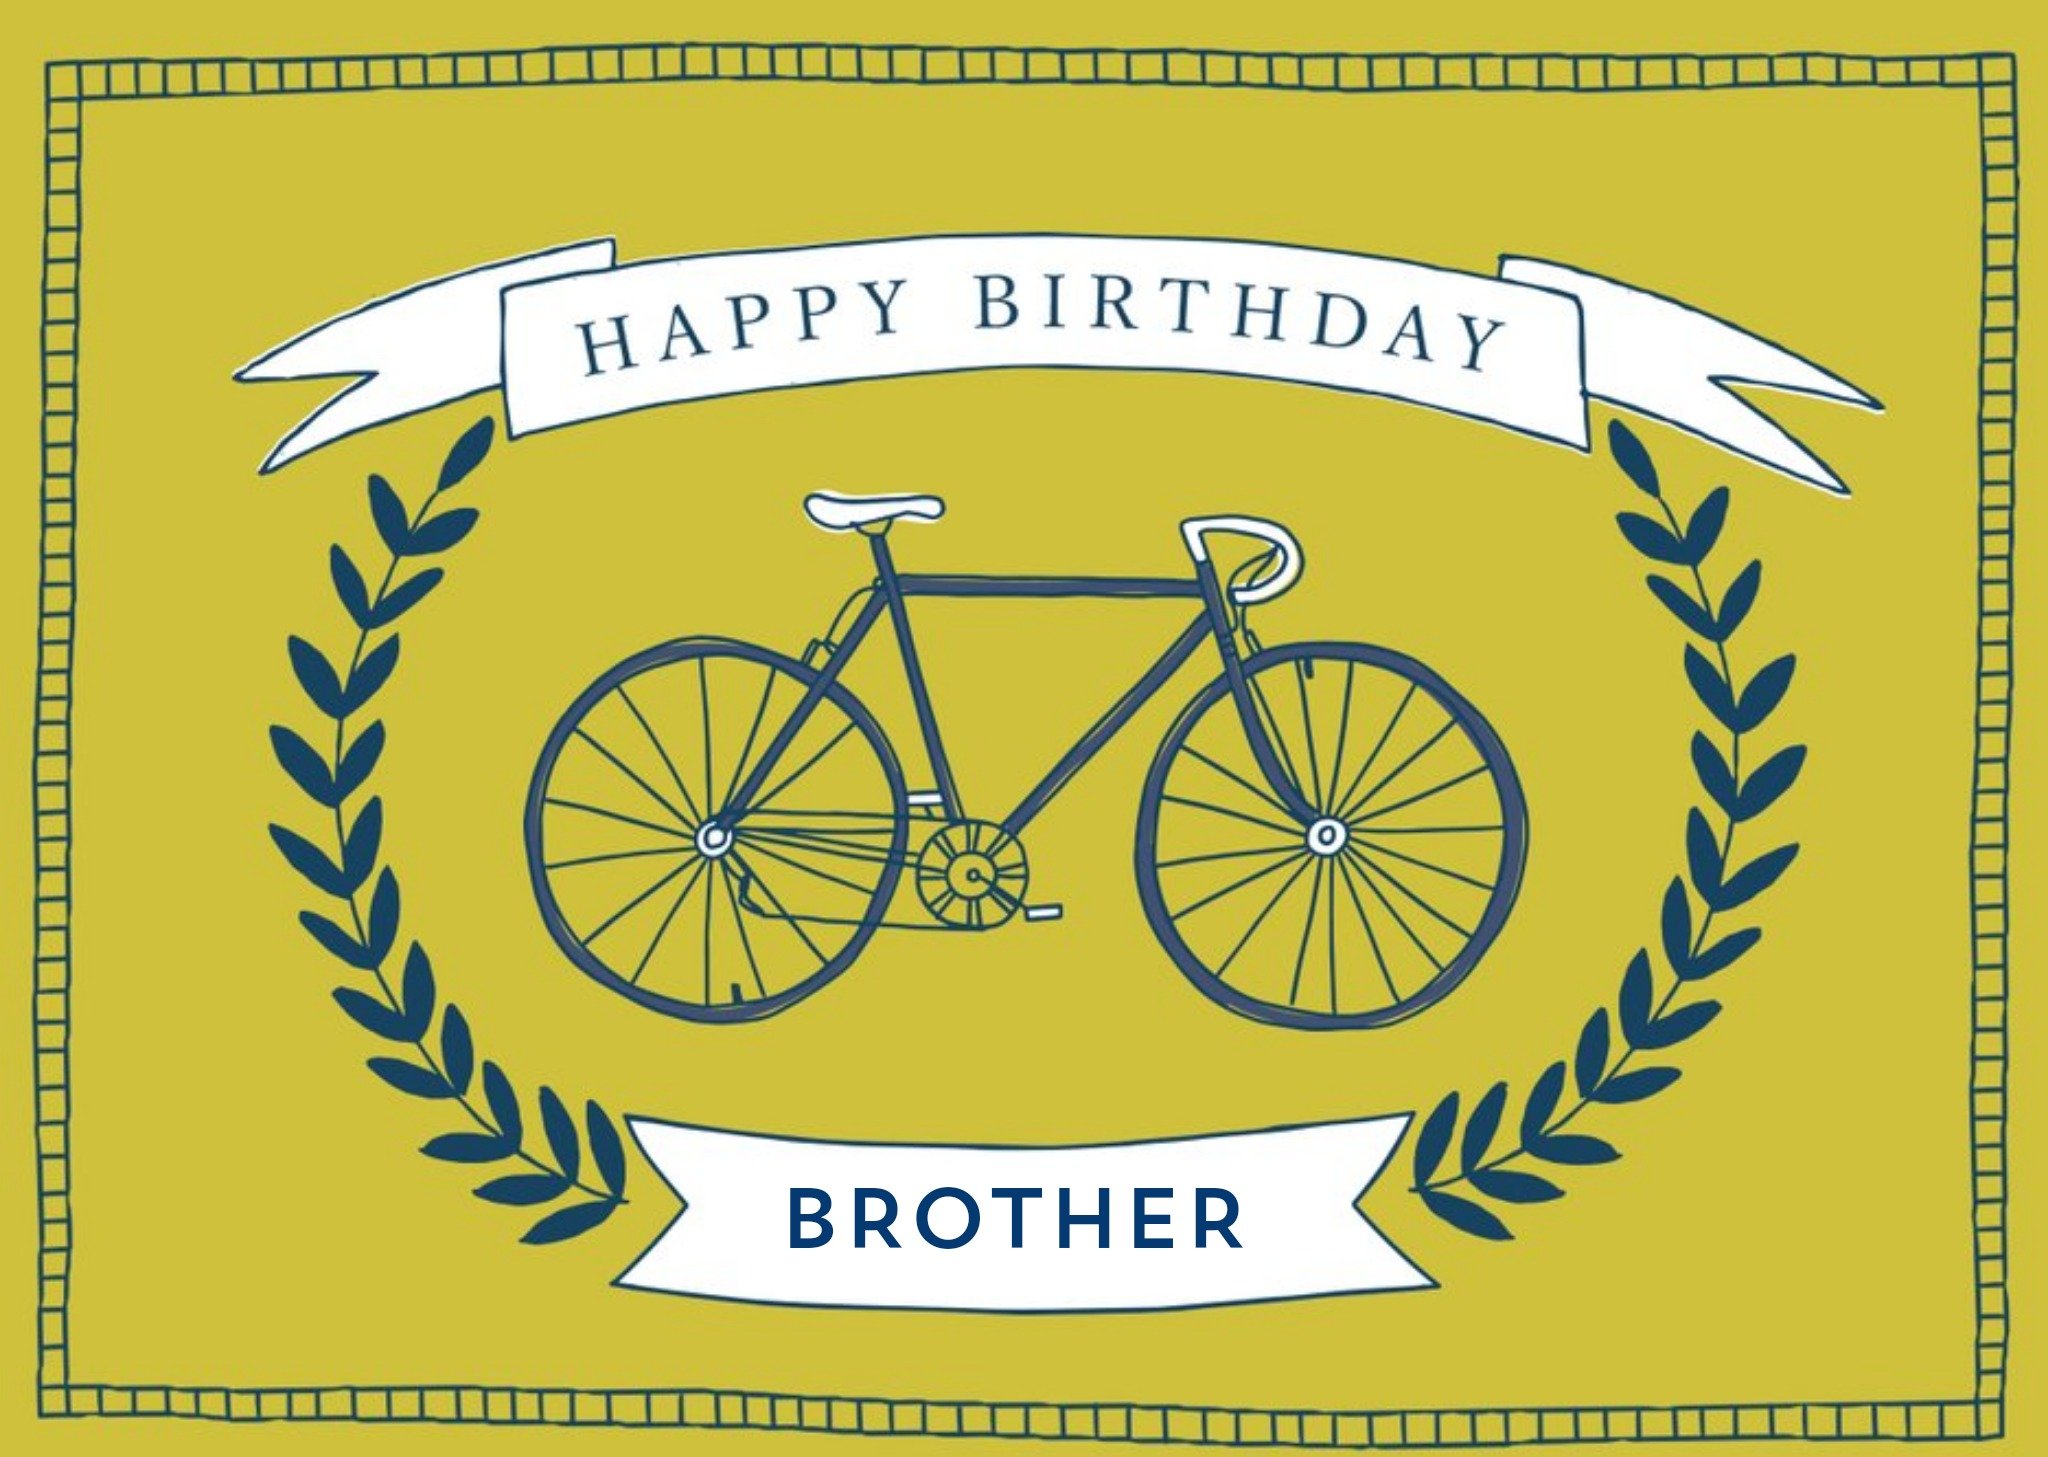 Moonpig Birthday Card - Bicycle - Brother, Large